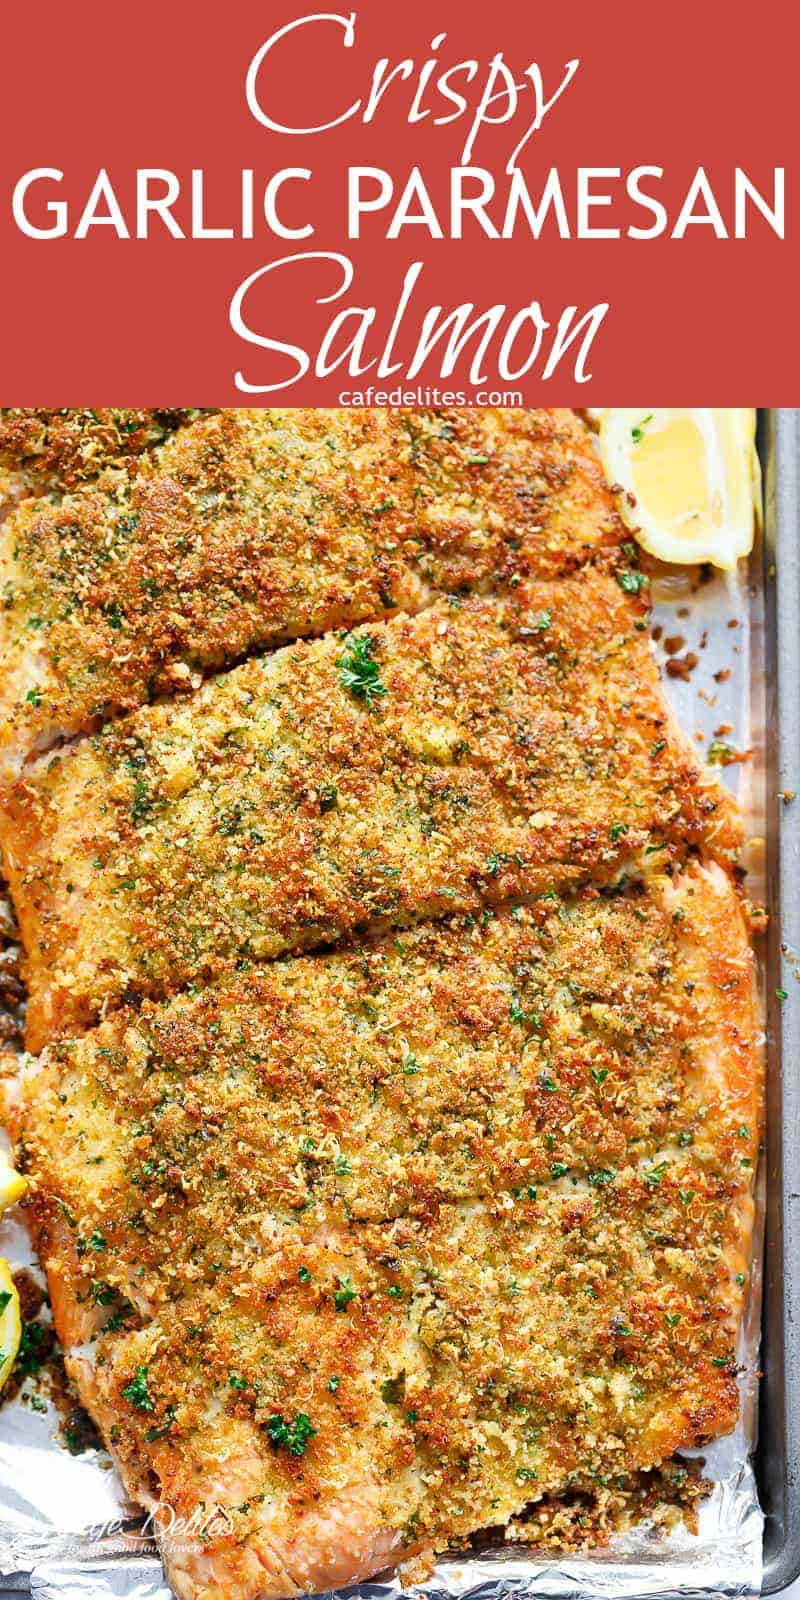 Crispy Garlic Parmesan Salmon is ready and on your table in less than 15 minutes, with a 5-ingredient crispy top! Restaurant quality salmon right at home! | https://cafedelites.com